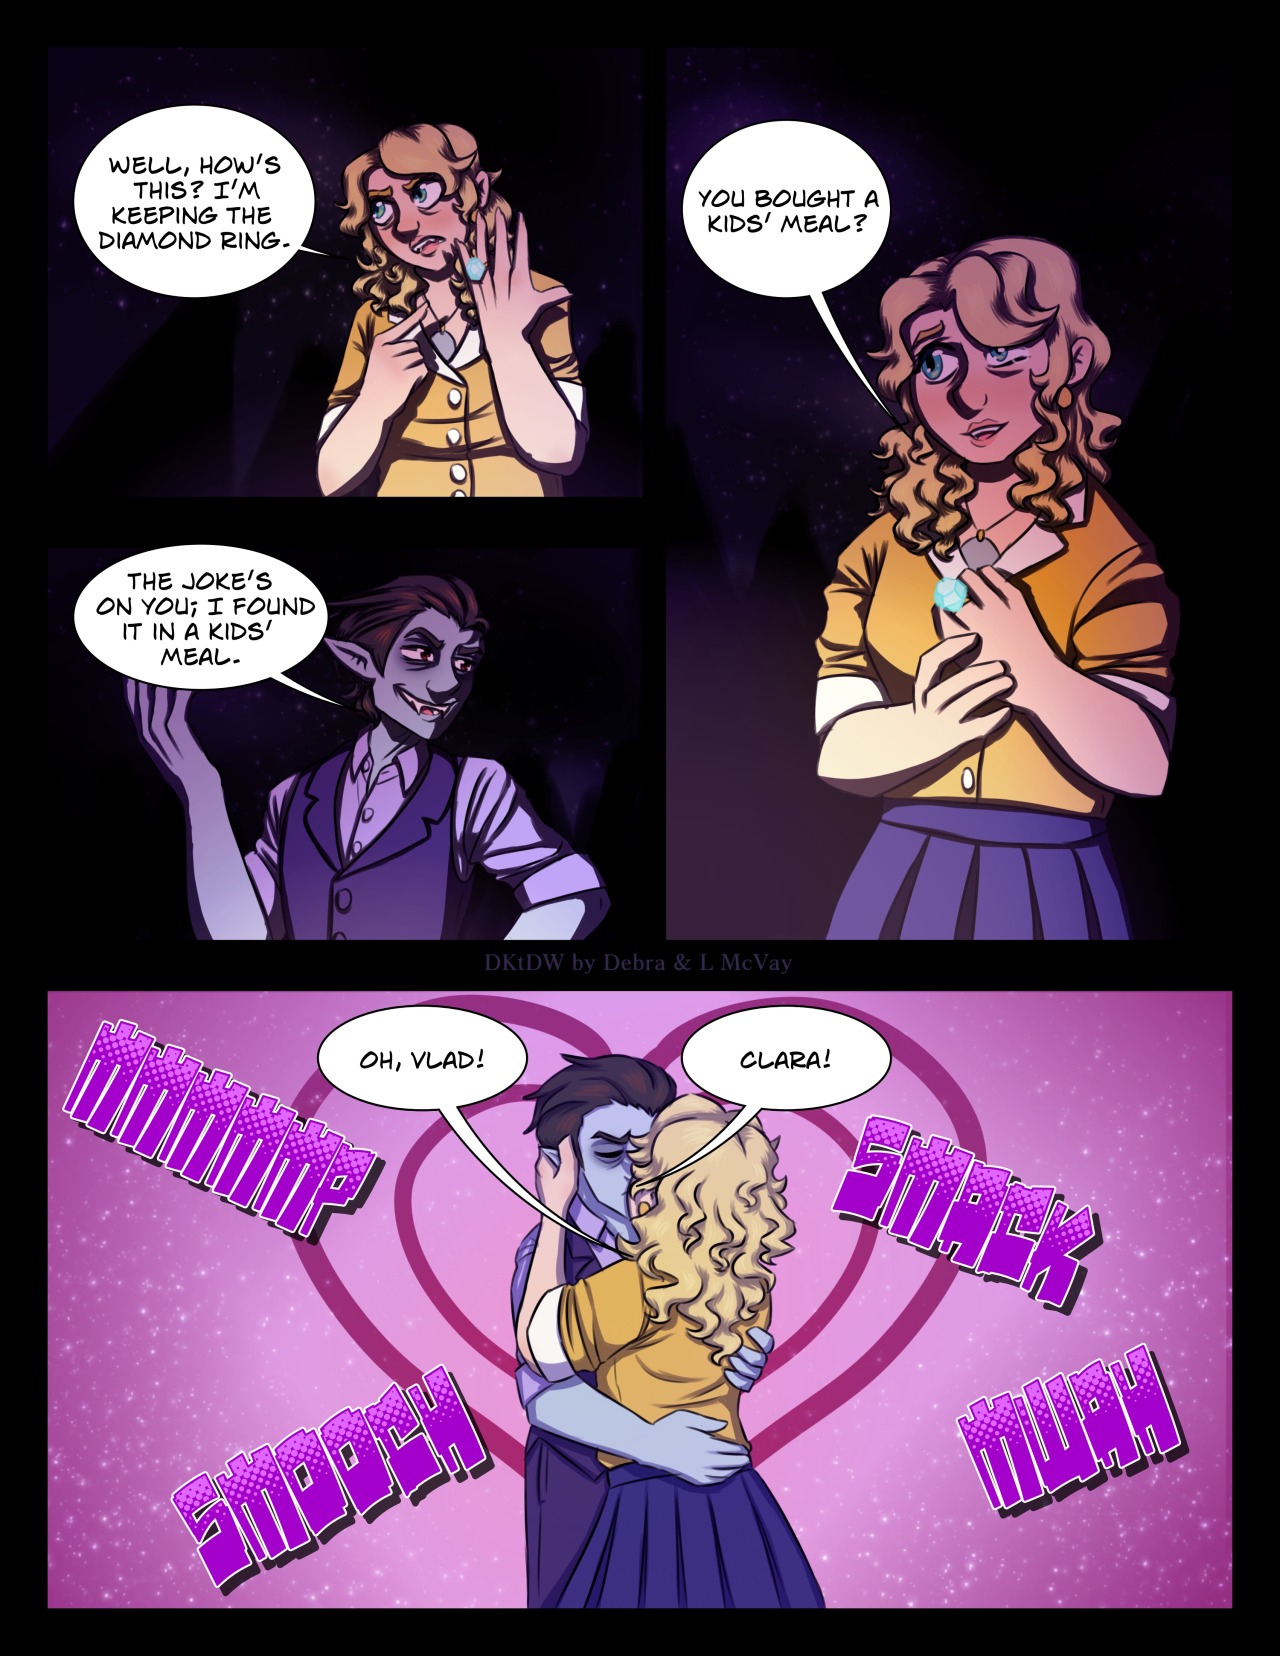 Blueycapsules fanmade comic I found on tumbler (right after what